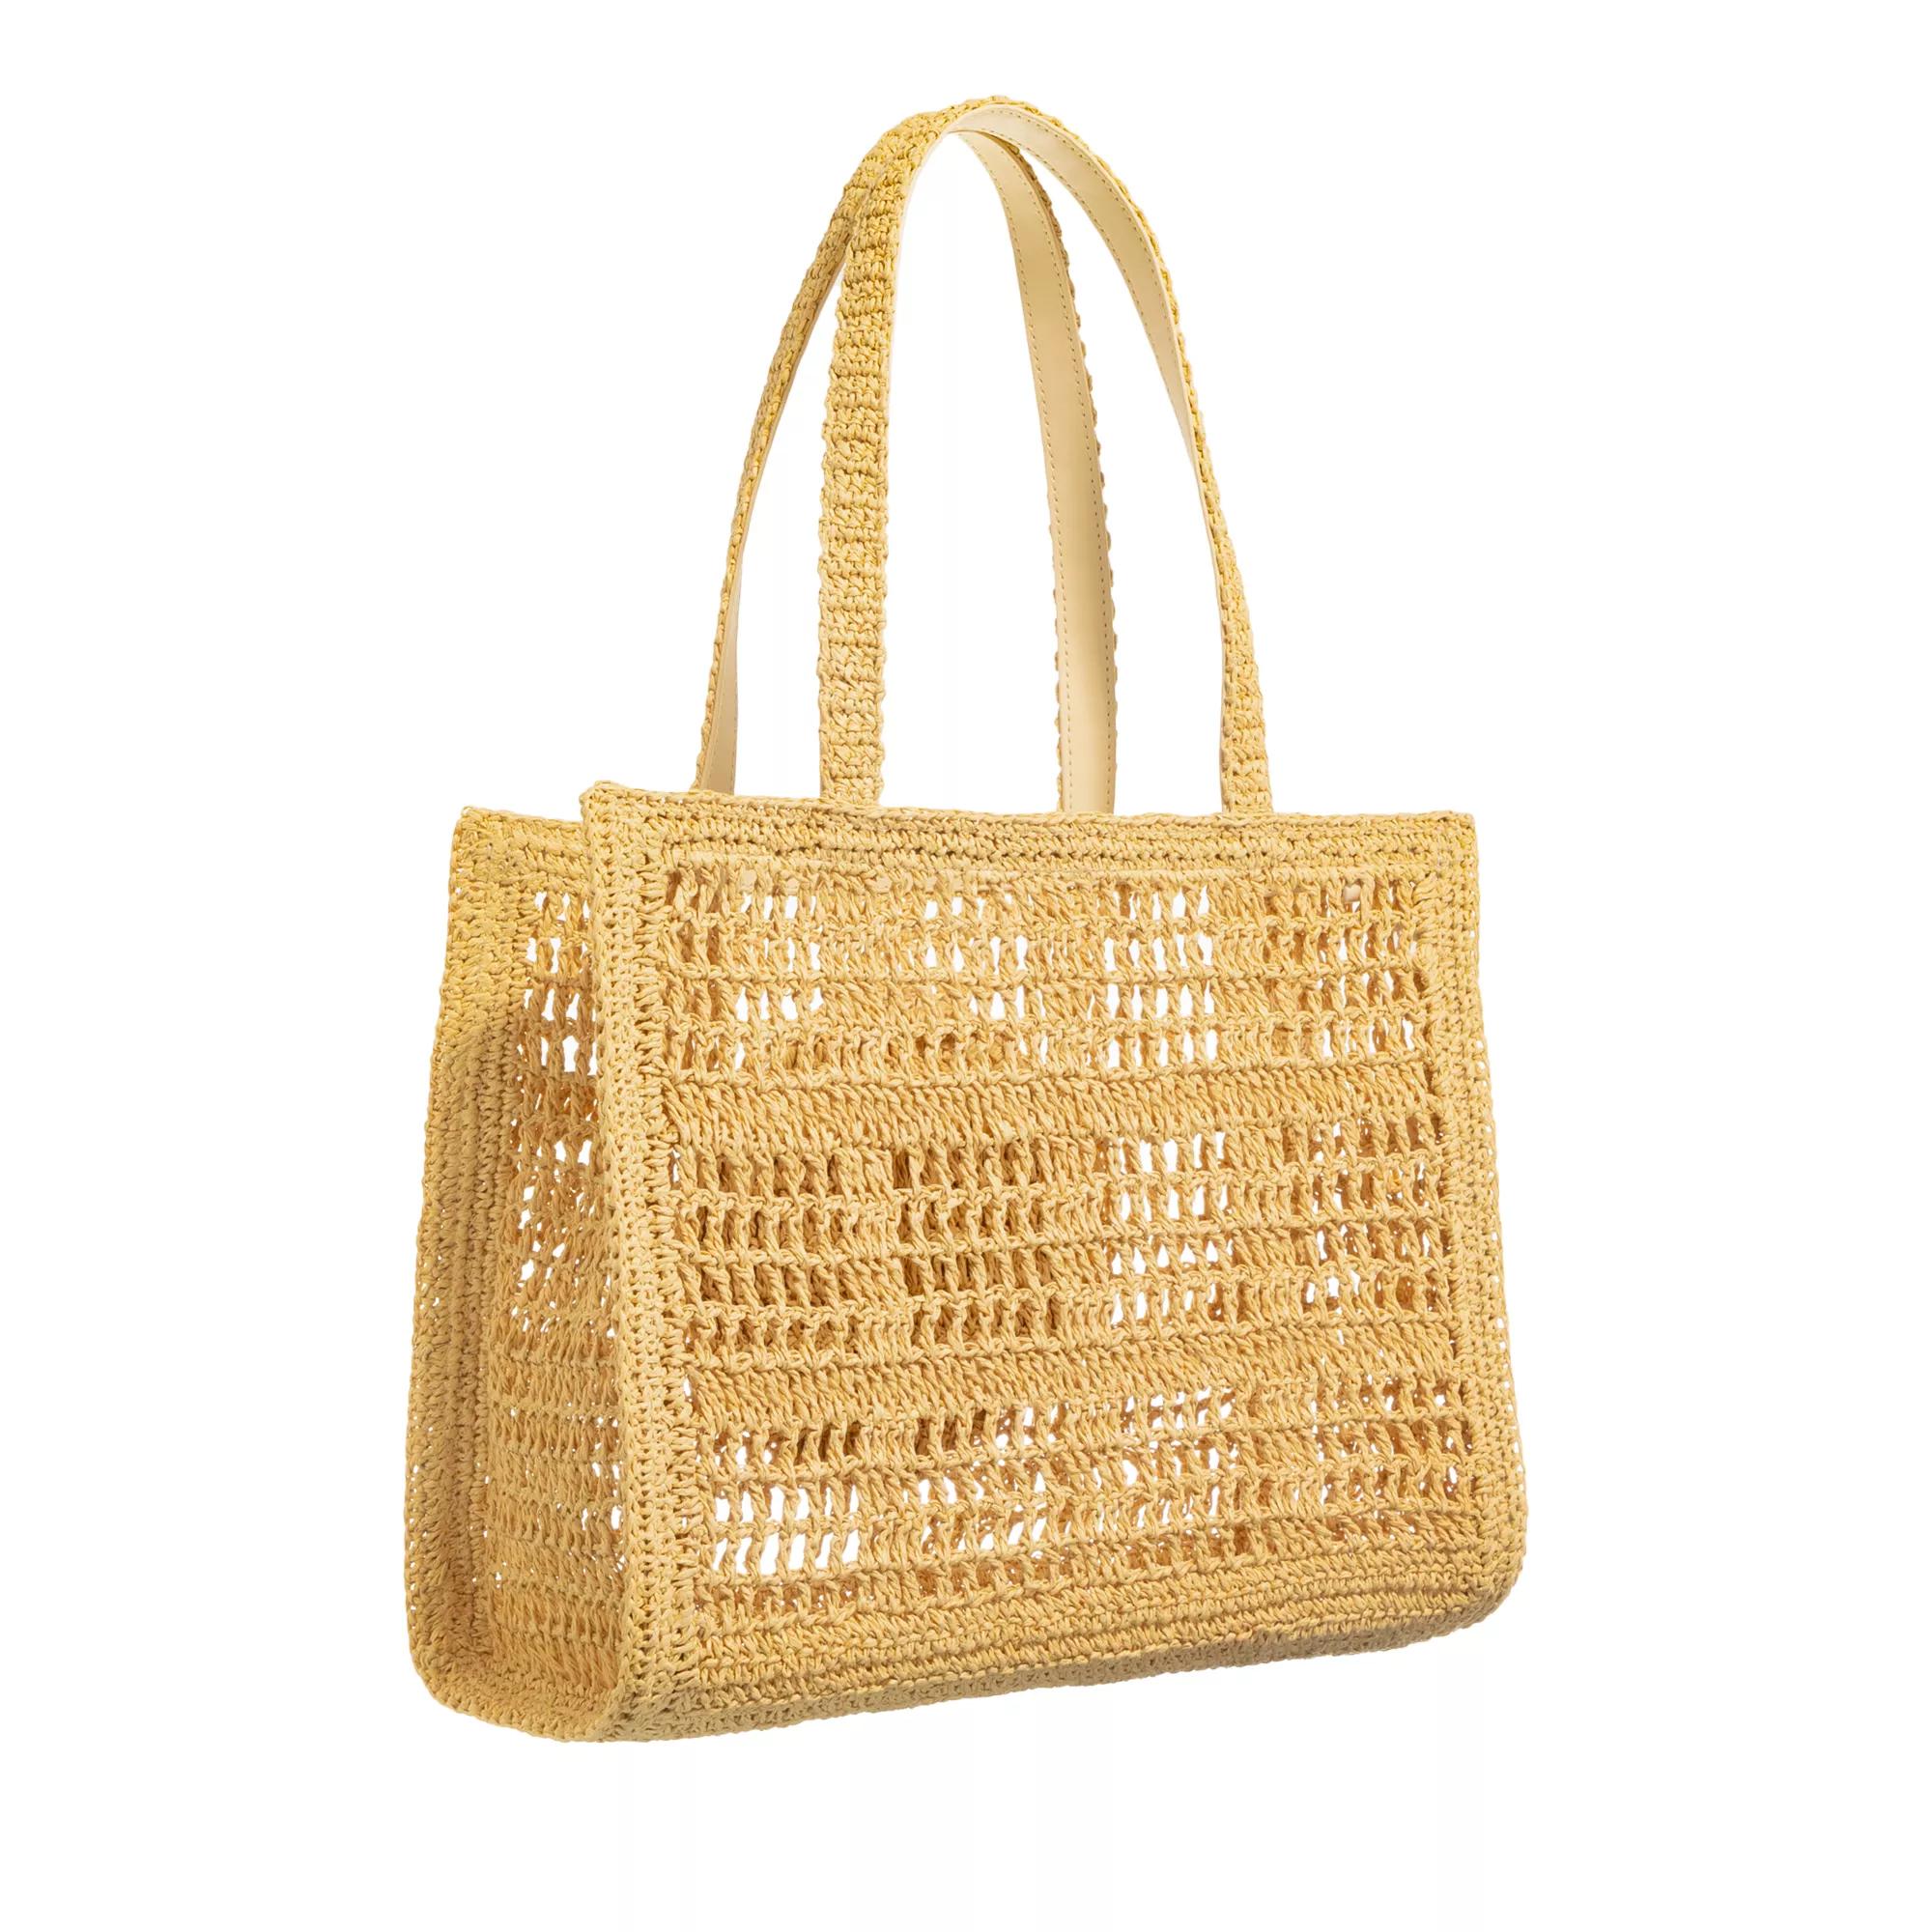 TORY BURCH Totes Ella Hand-Crocheted Small Tote in beige